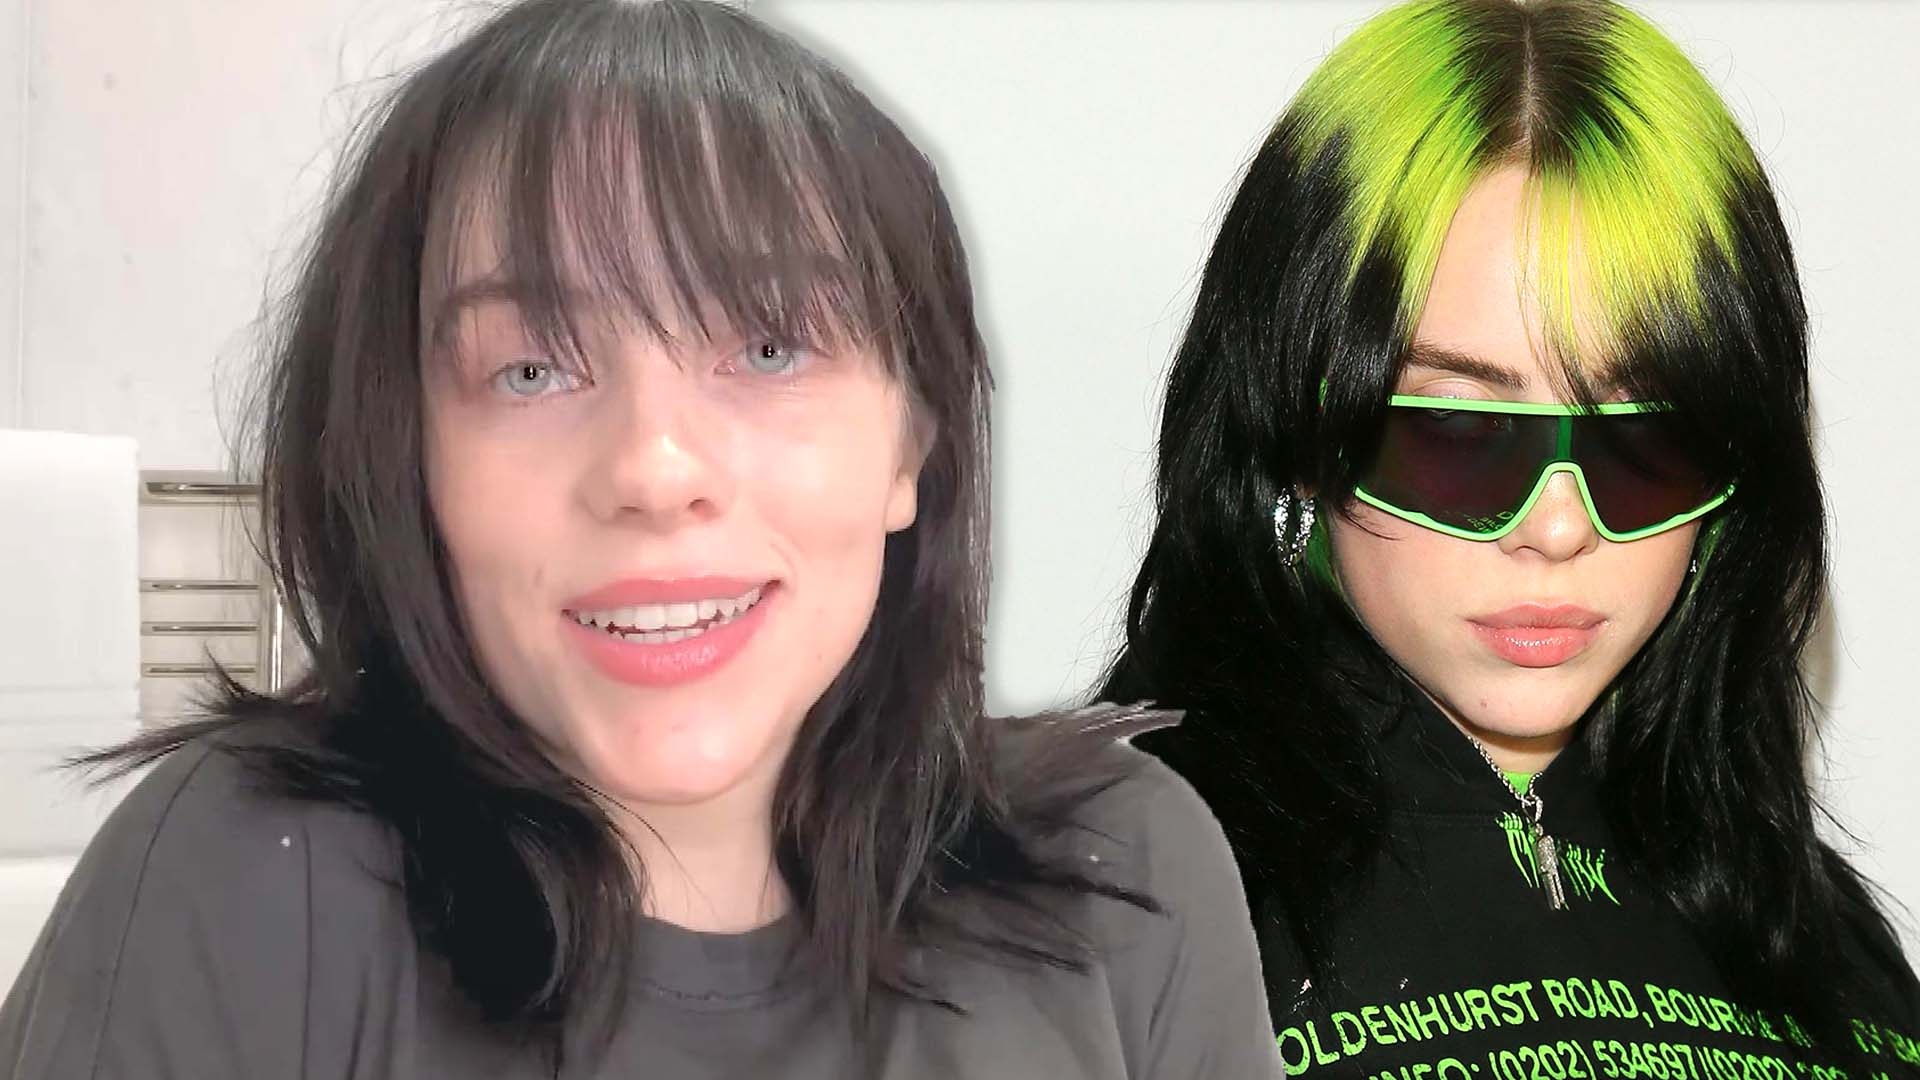 Billie Eilish Has Hypermobility — Here's What That Is